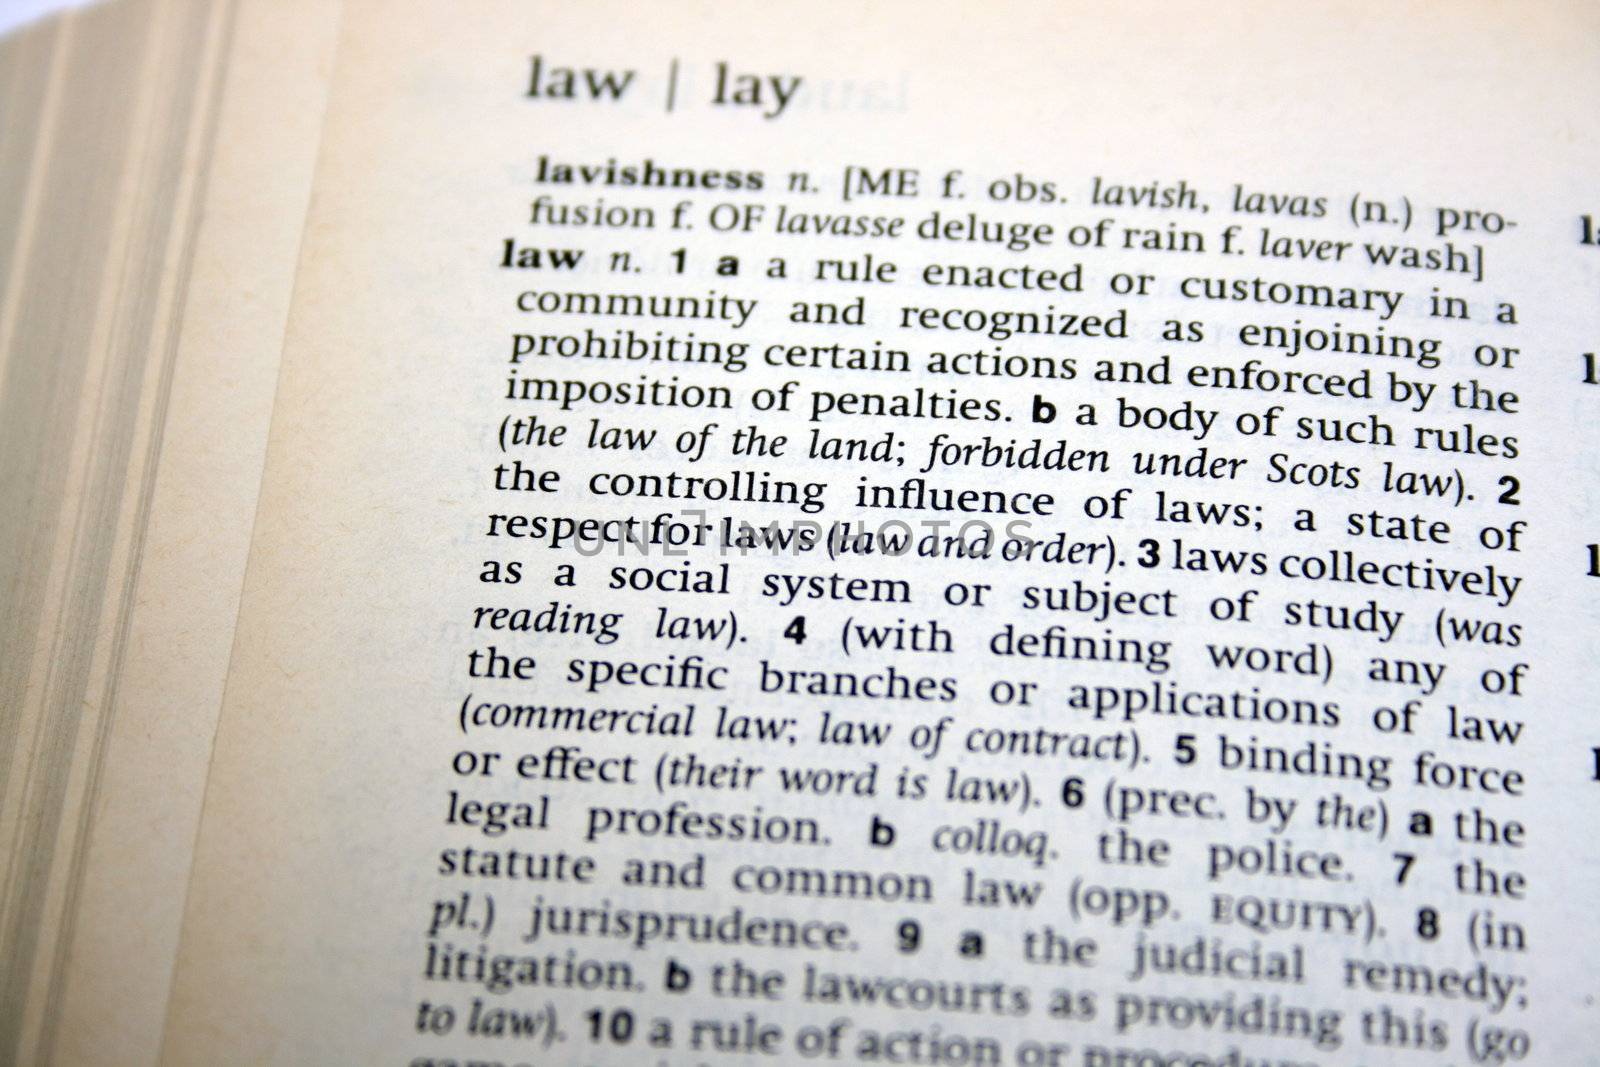 Meaning of the Law by keki